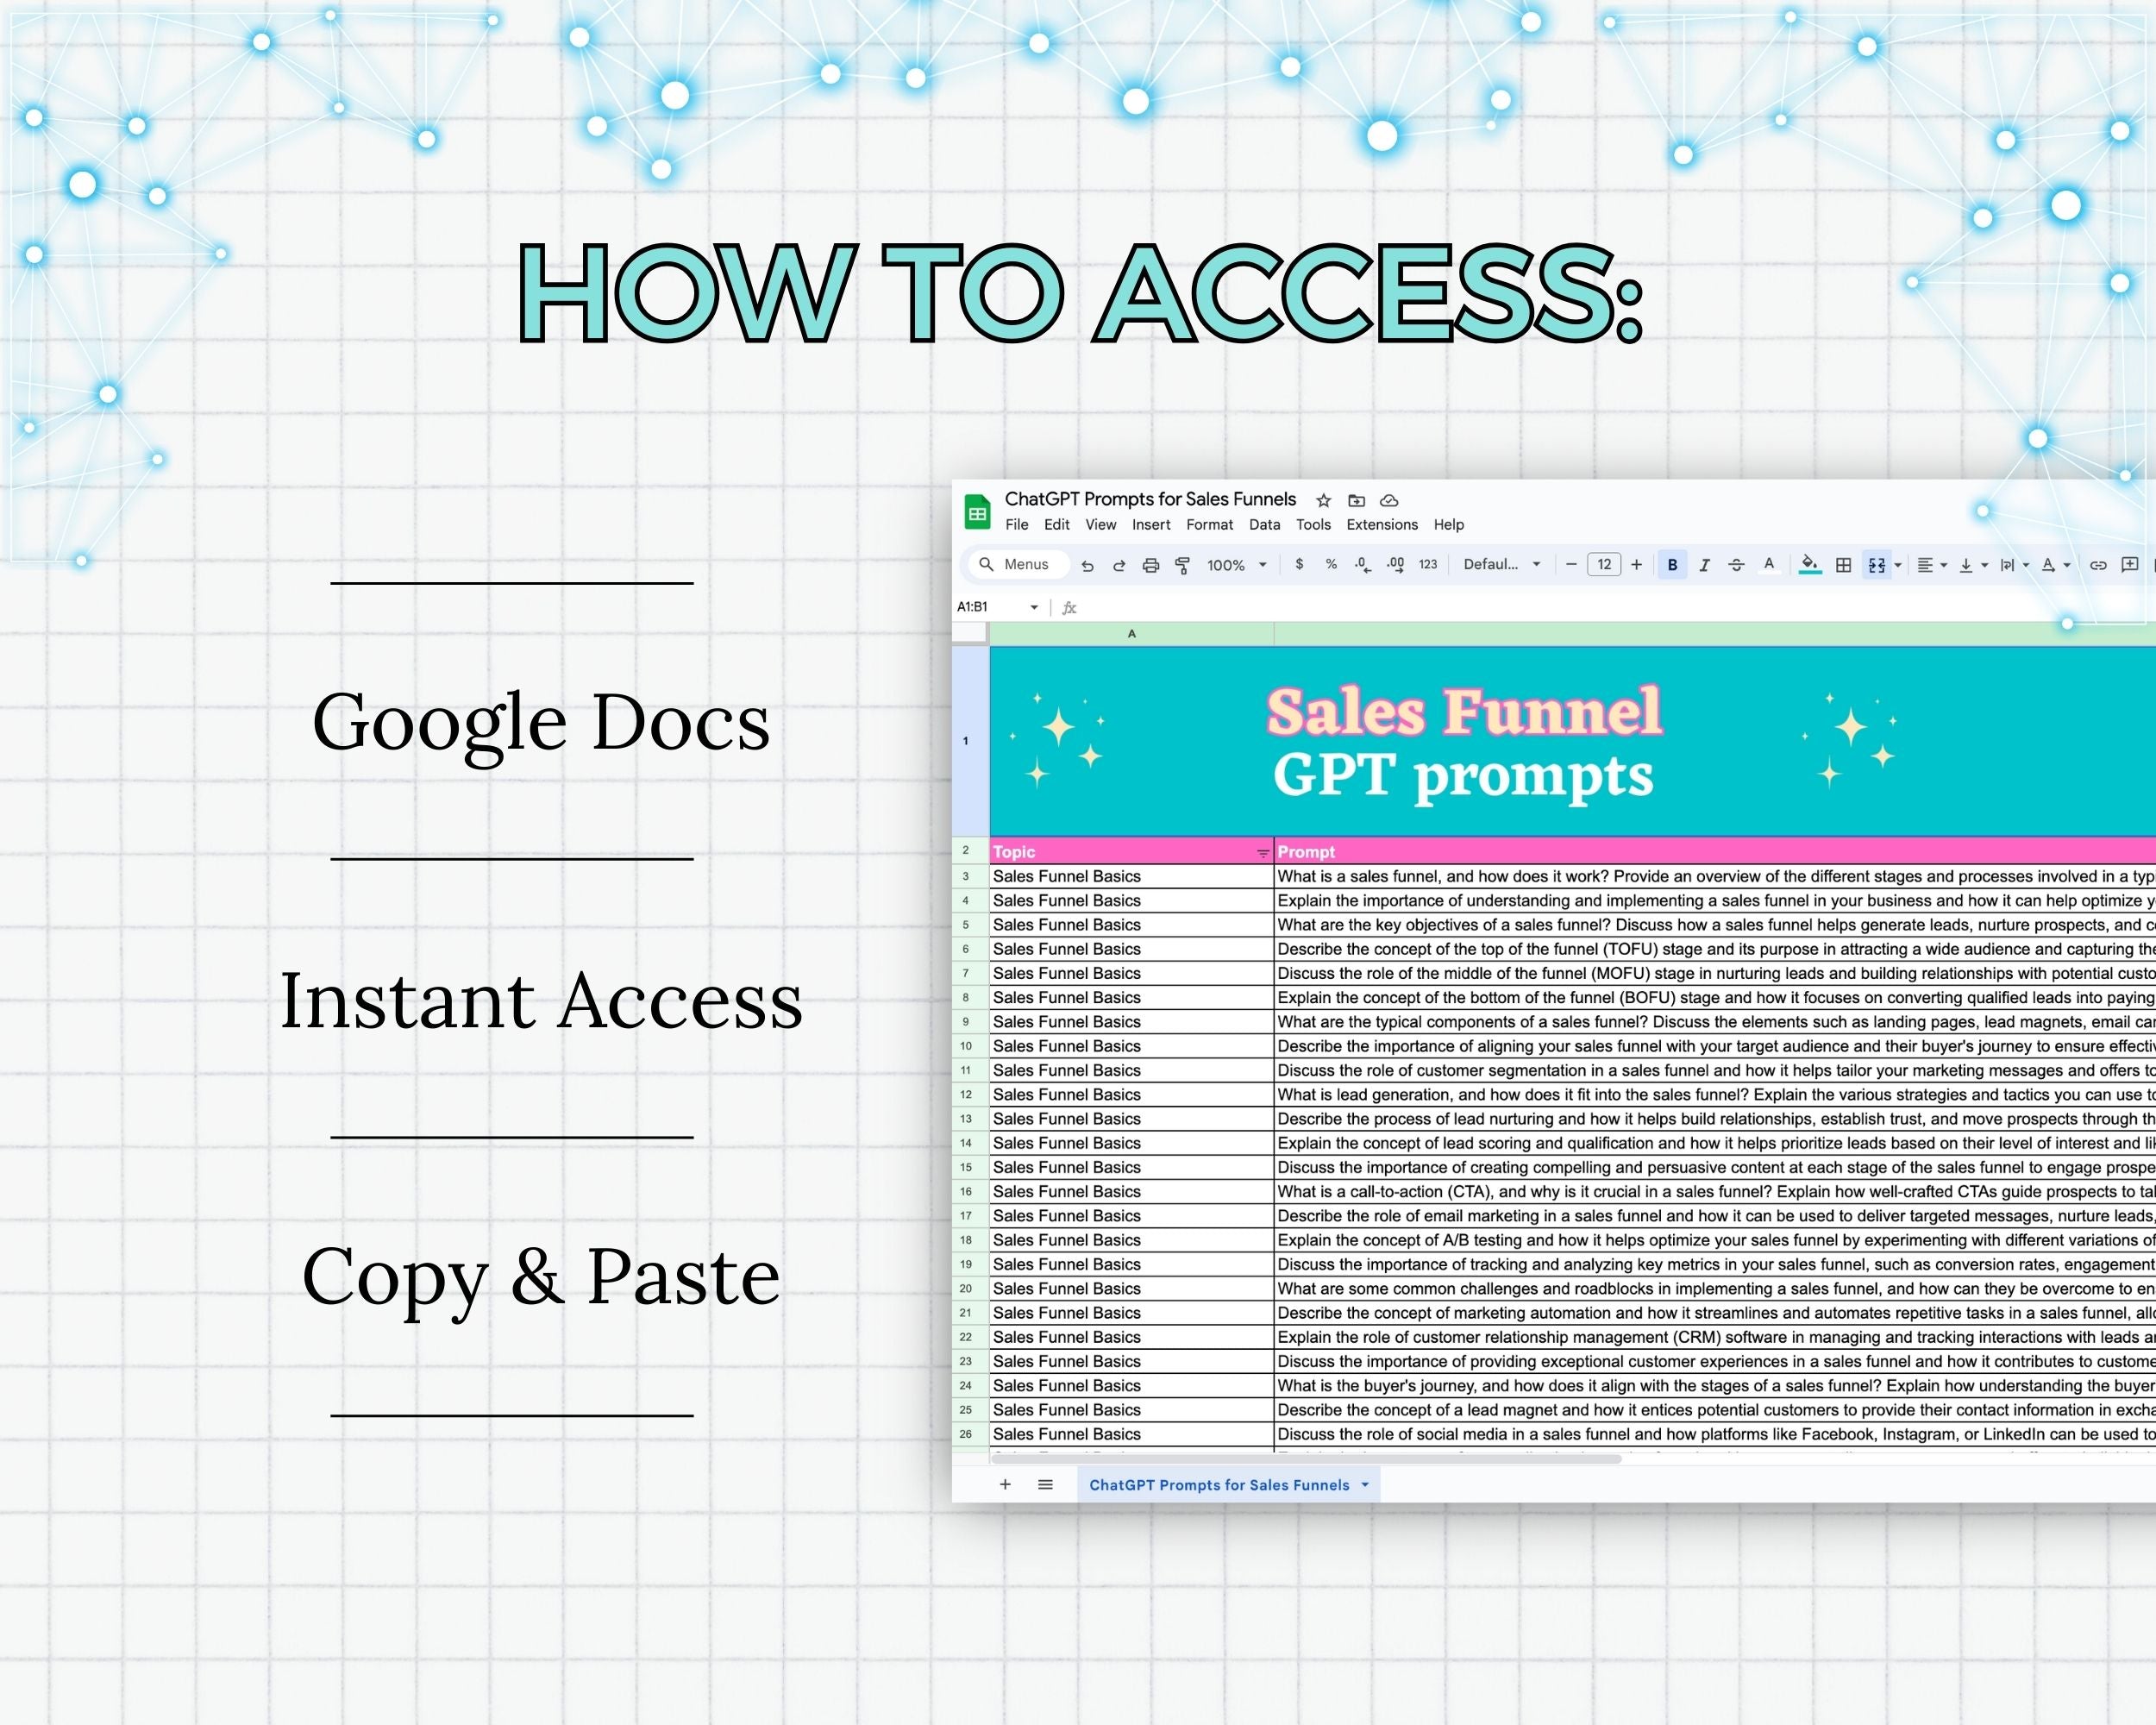 2000+ Chat GPT Prompts for Sales Funnels